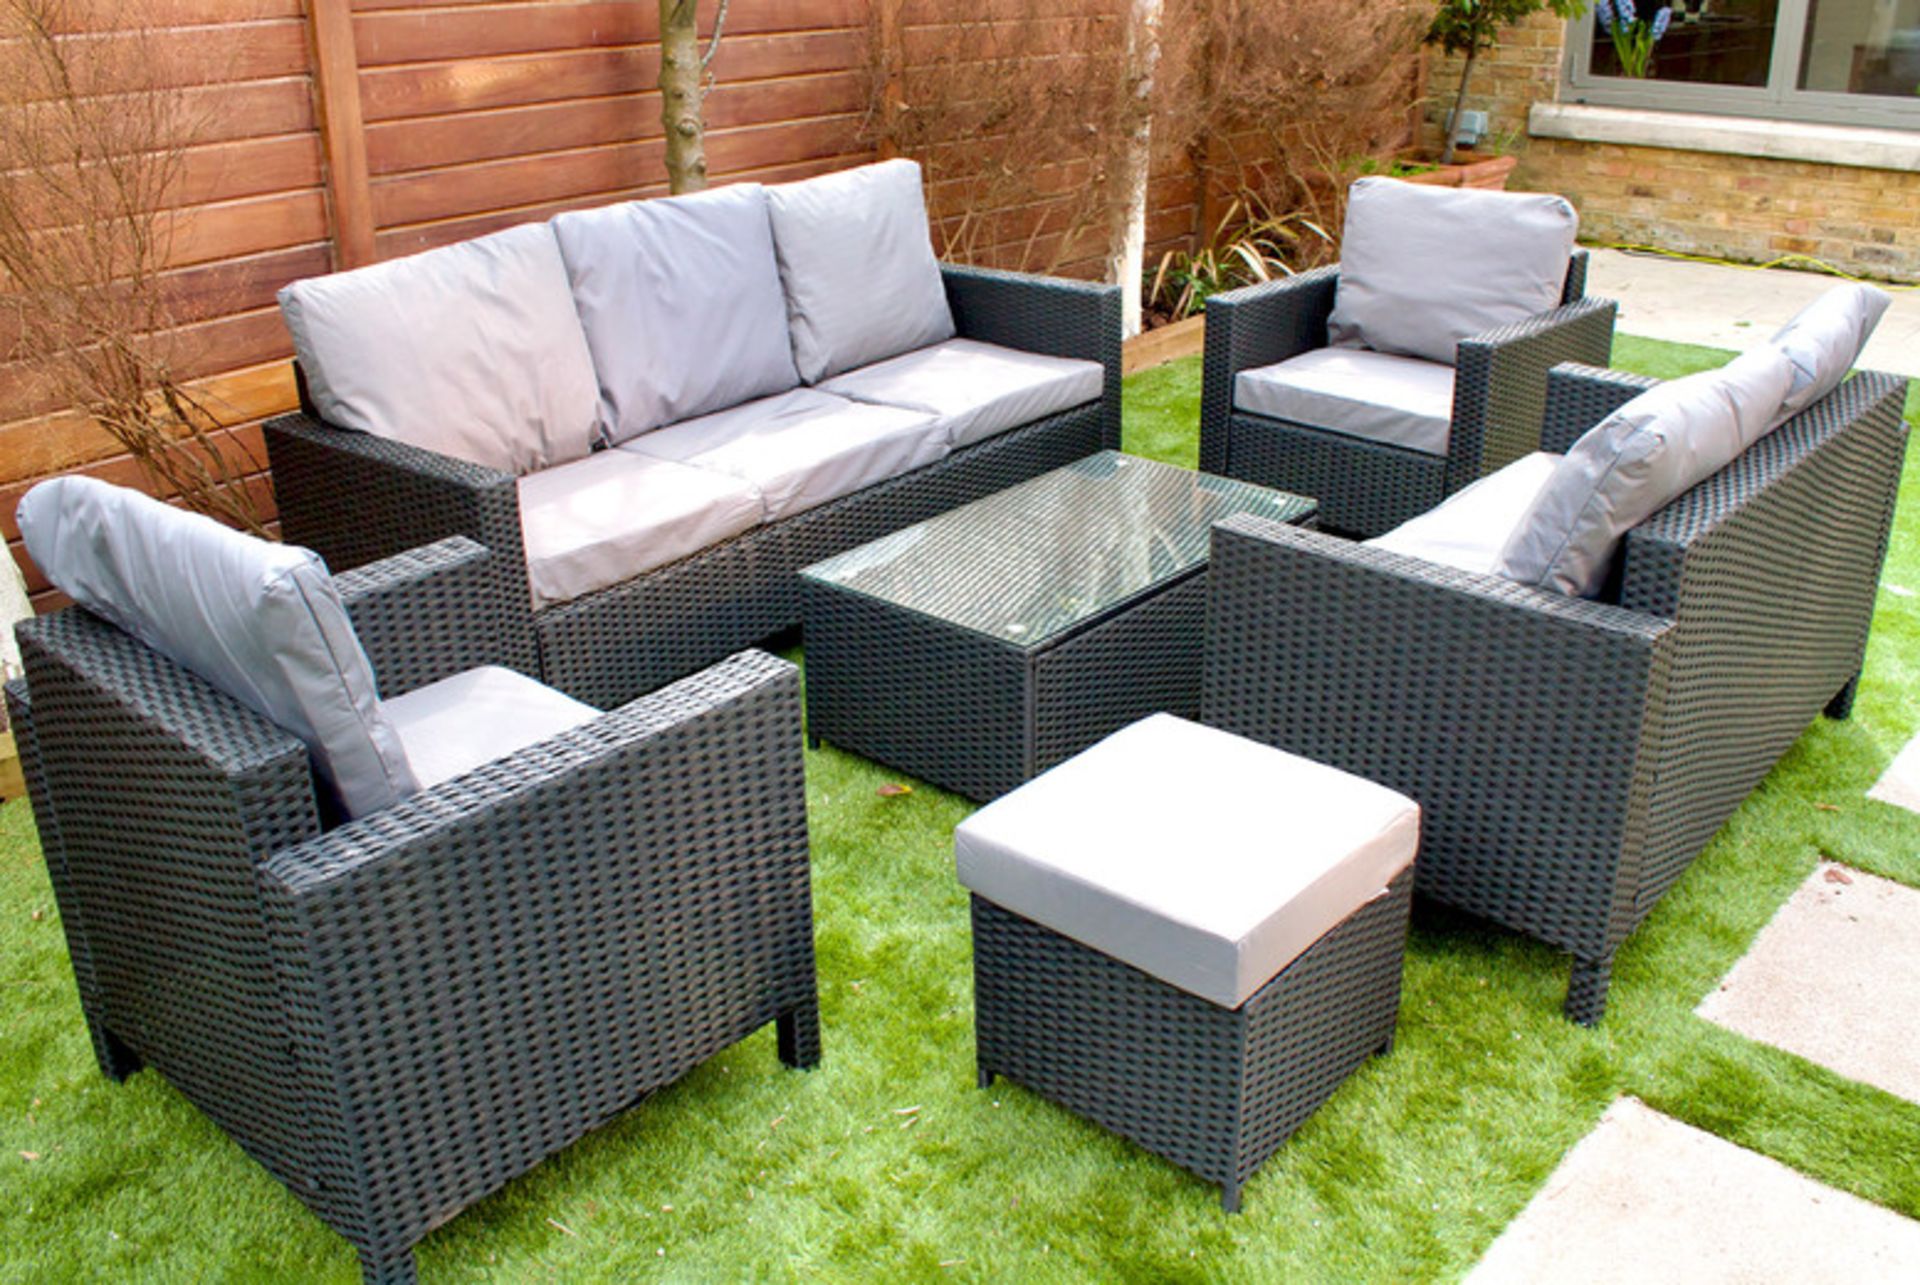 FREE DELIVERY - 8-SEATER RATTAN CHAIR & SOFA GARDEN FURNITURE SET - BLACK - Image 2 of 2